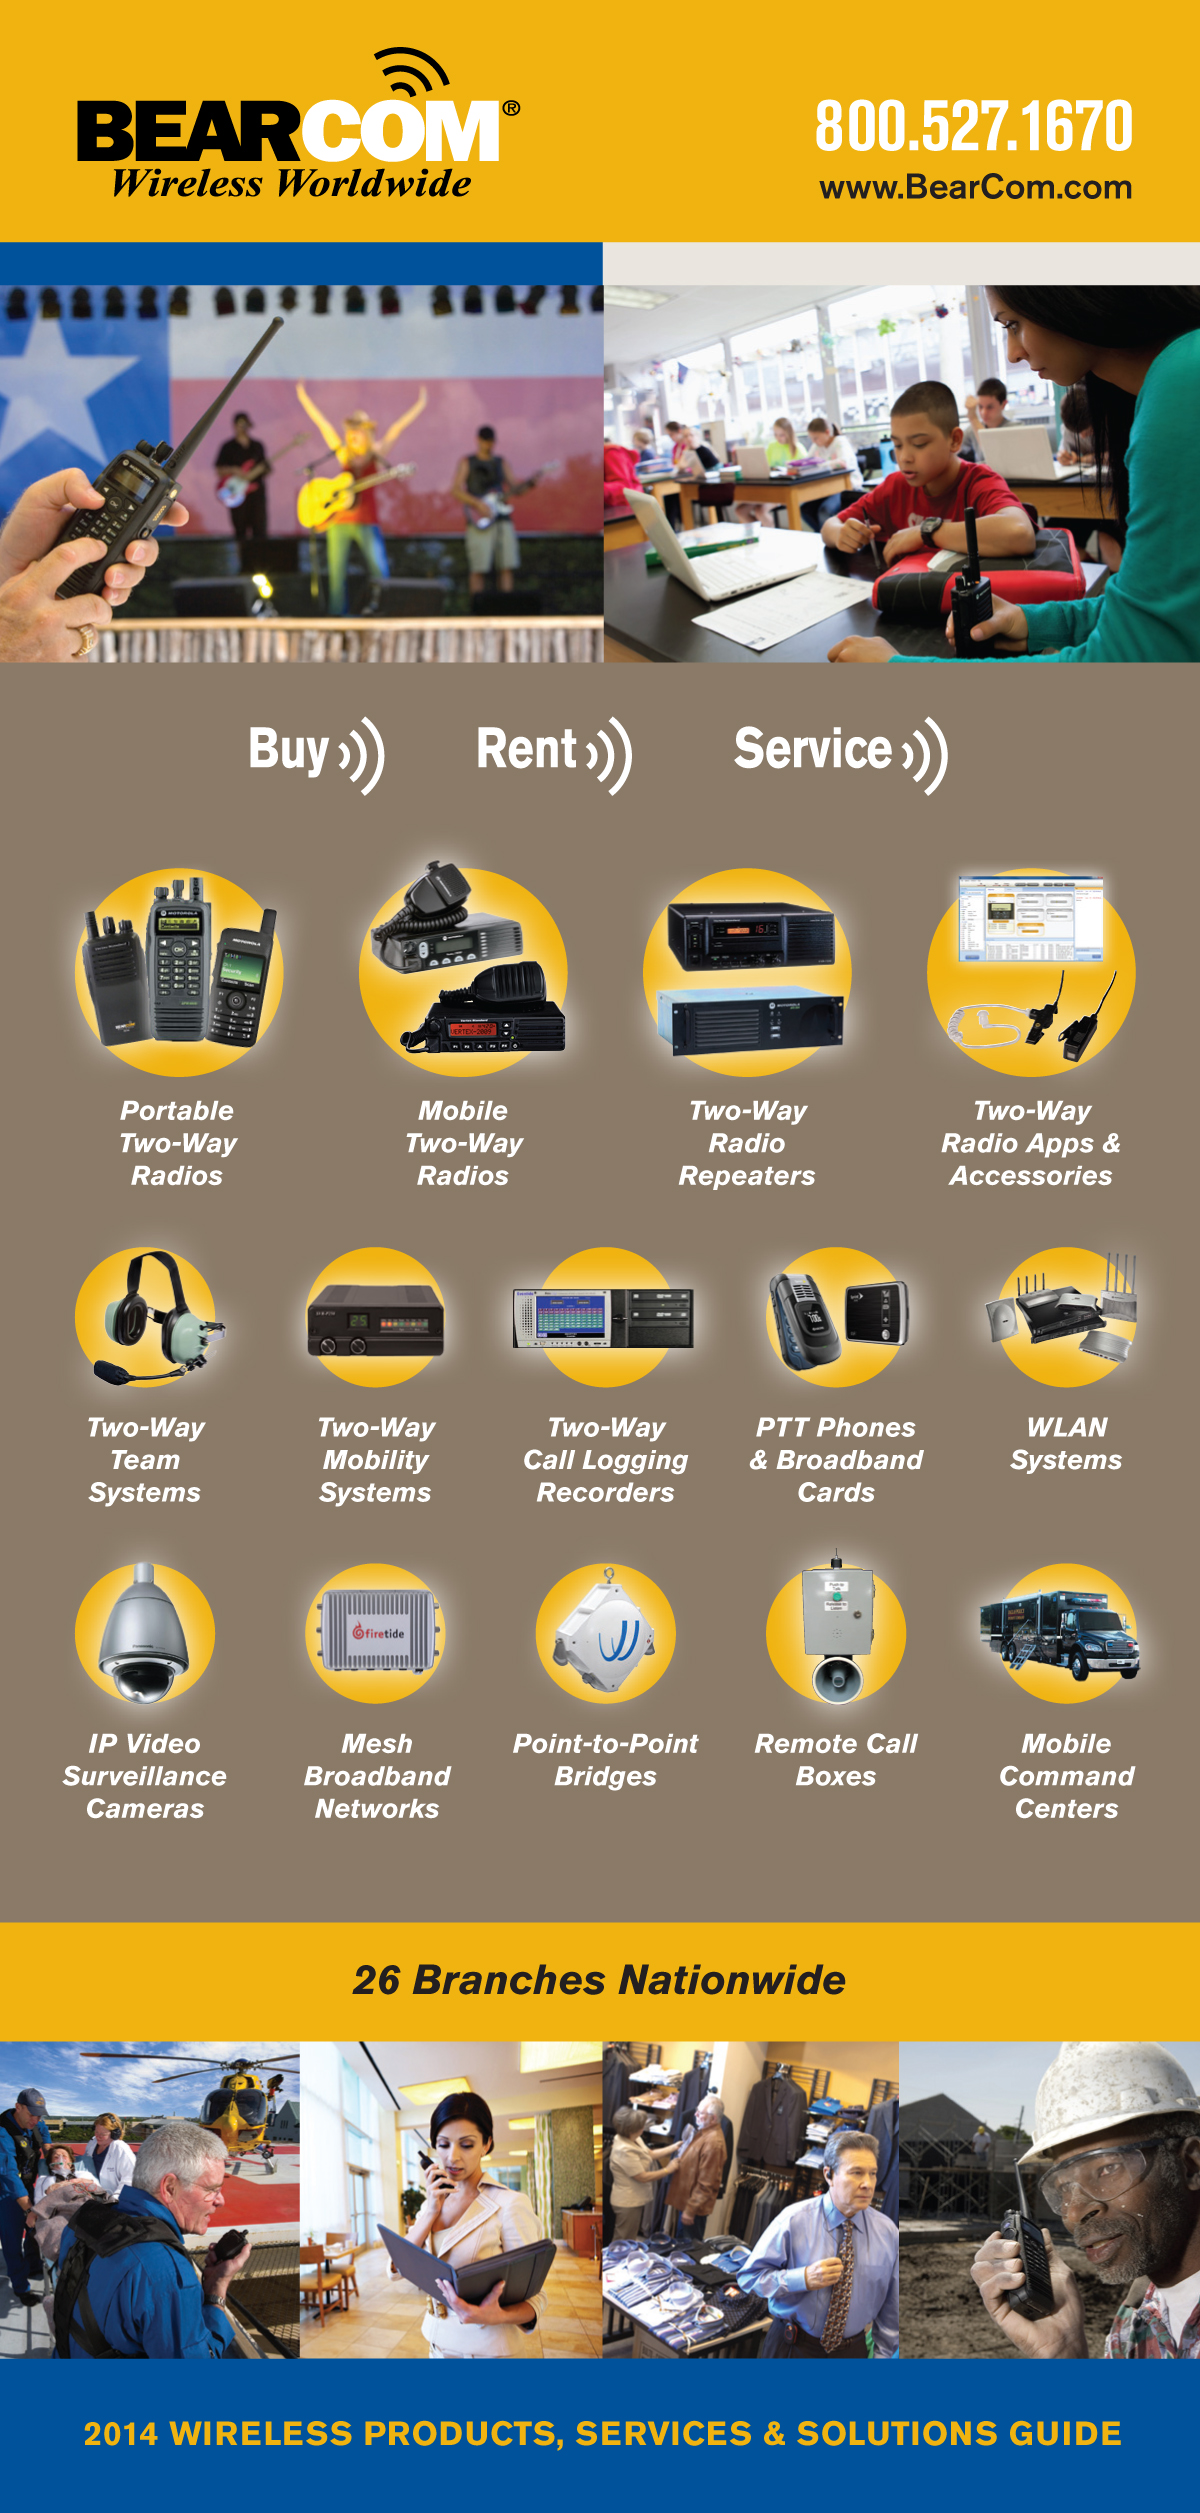 The guide highlights the products and solutions offered by BearCom and all its wireless technology partners.